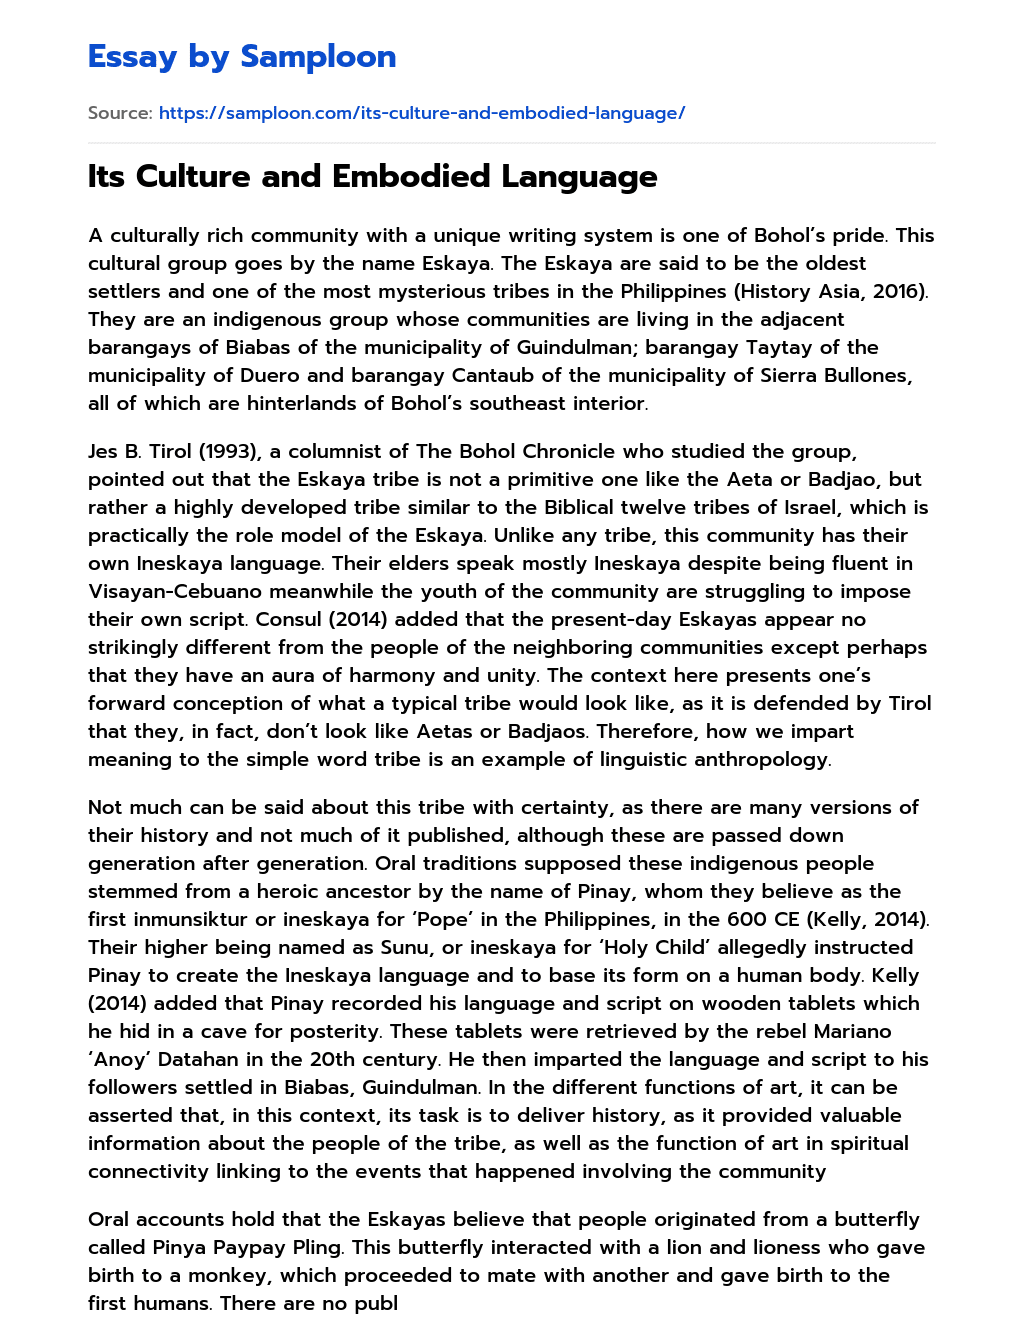 Its Culture and Embodied Language essay